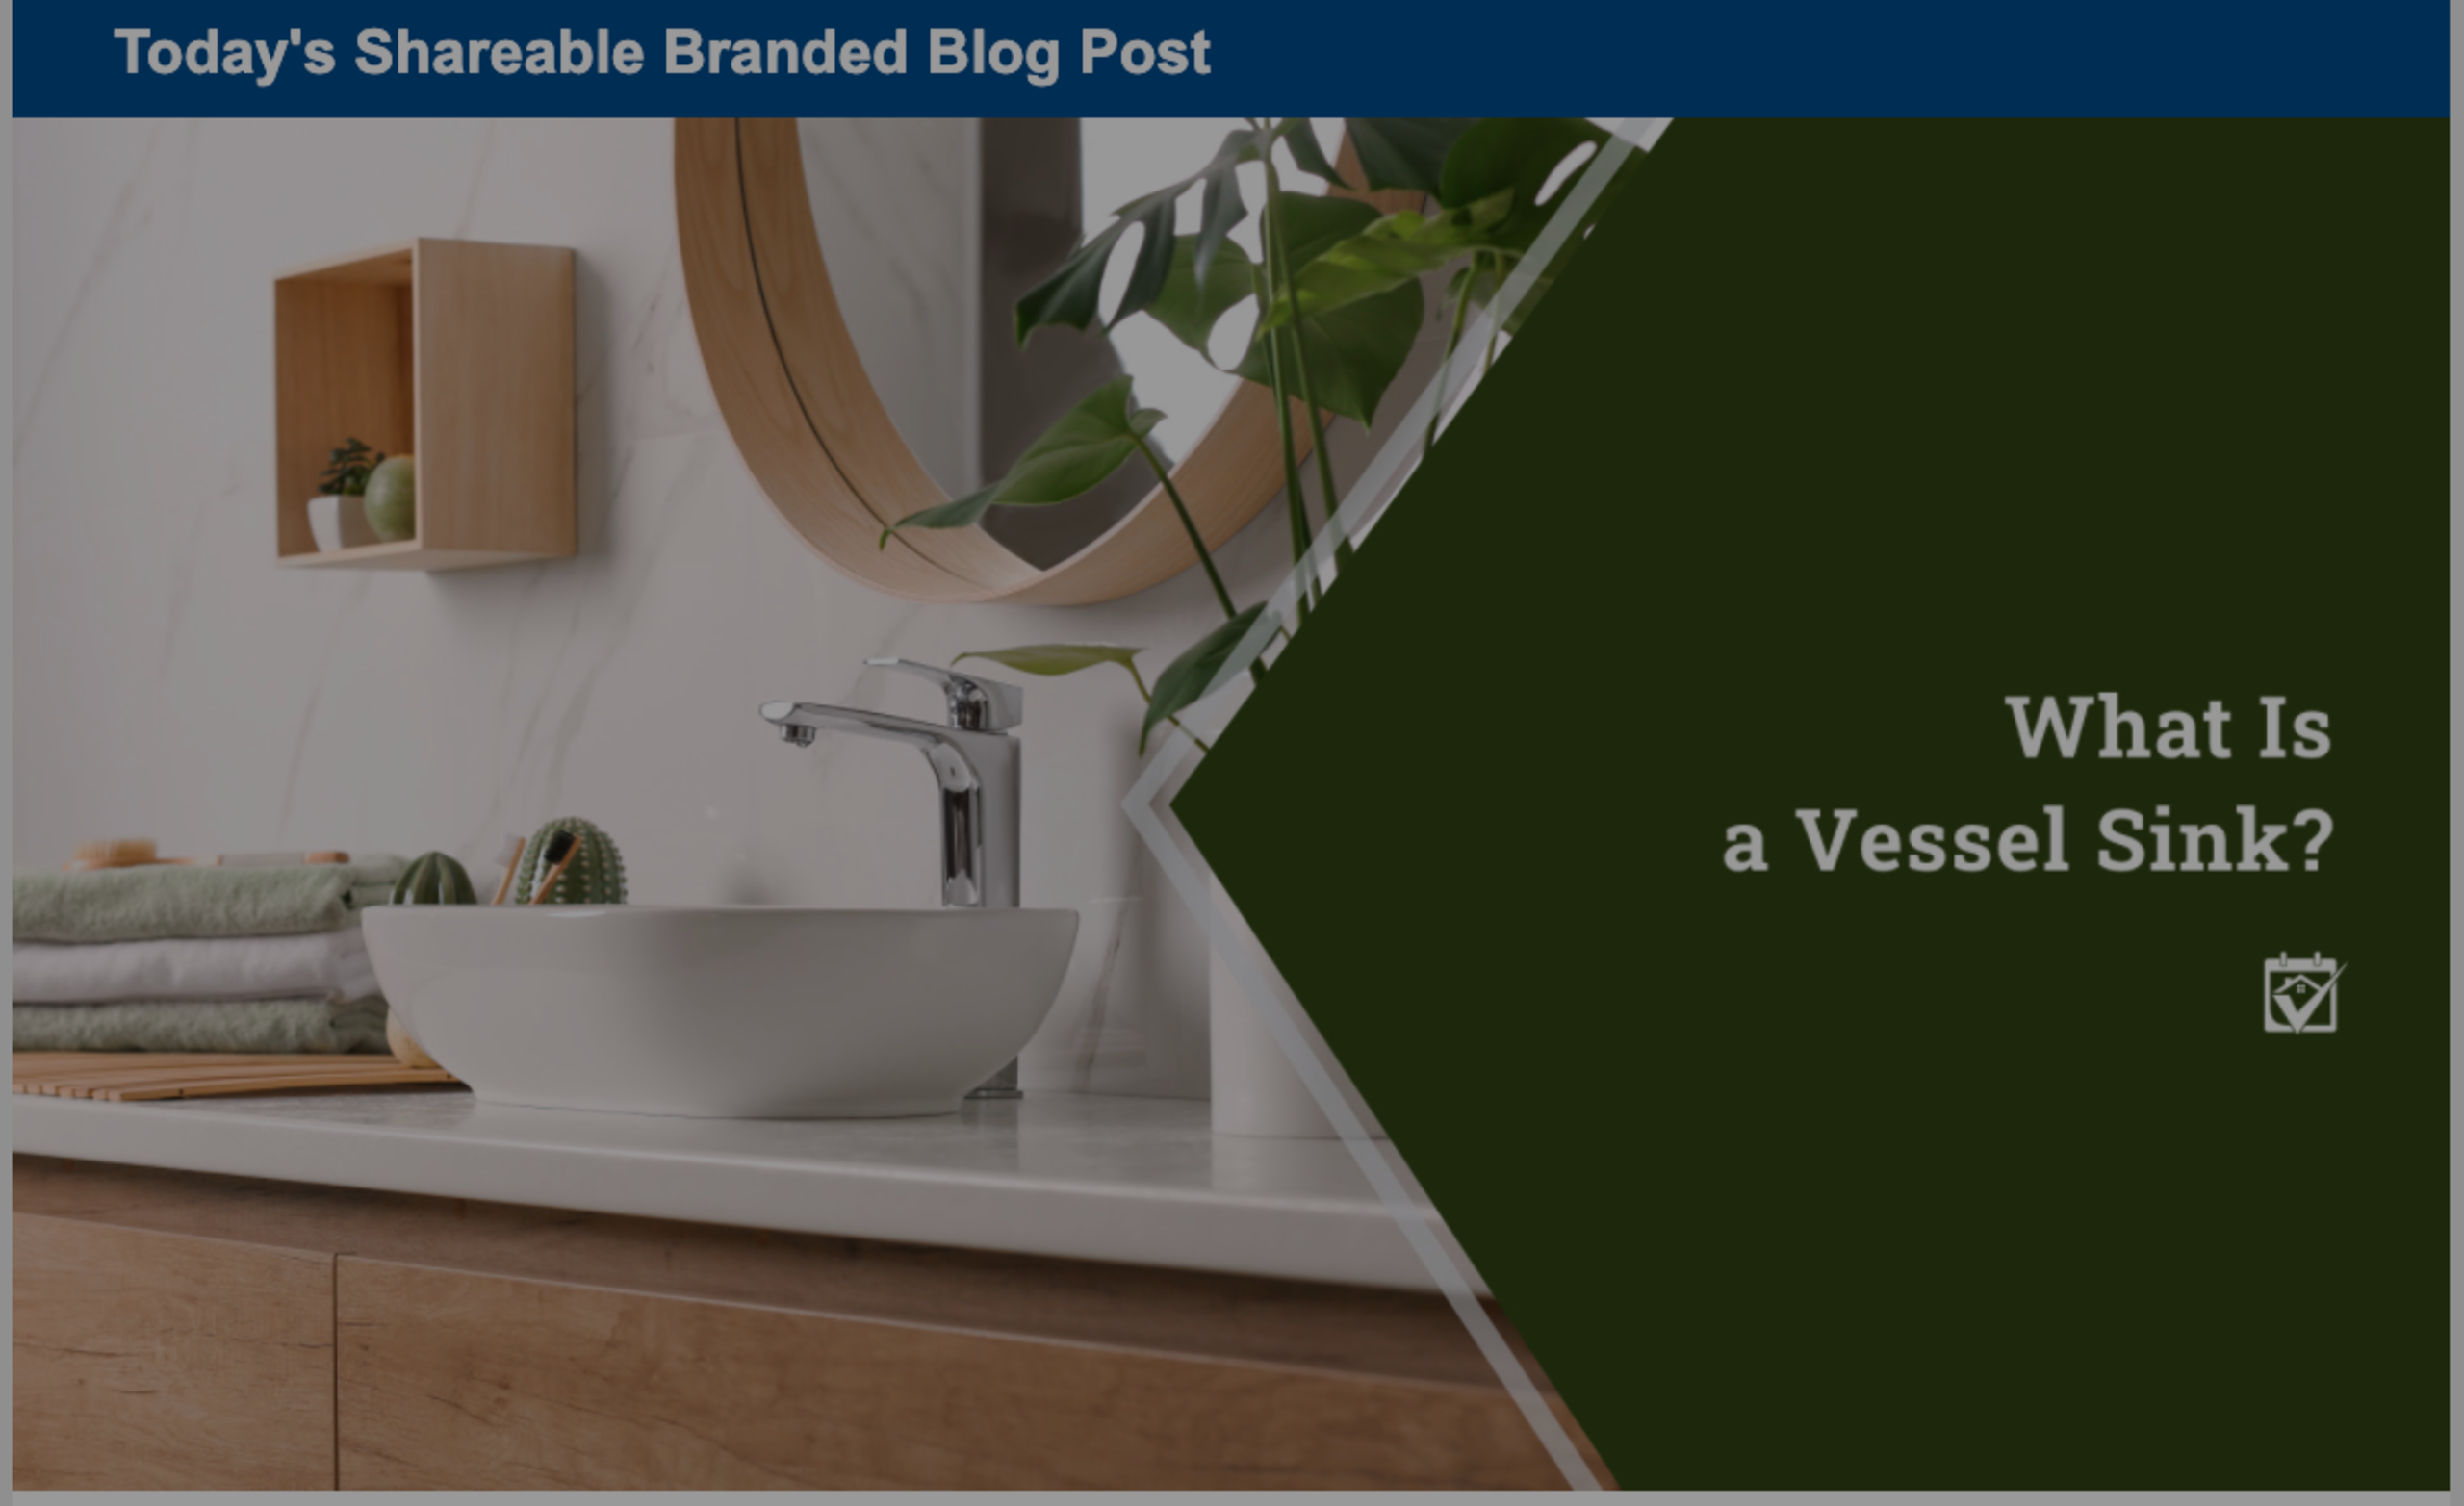 What Is a Vessel Sink?